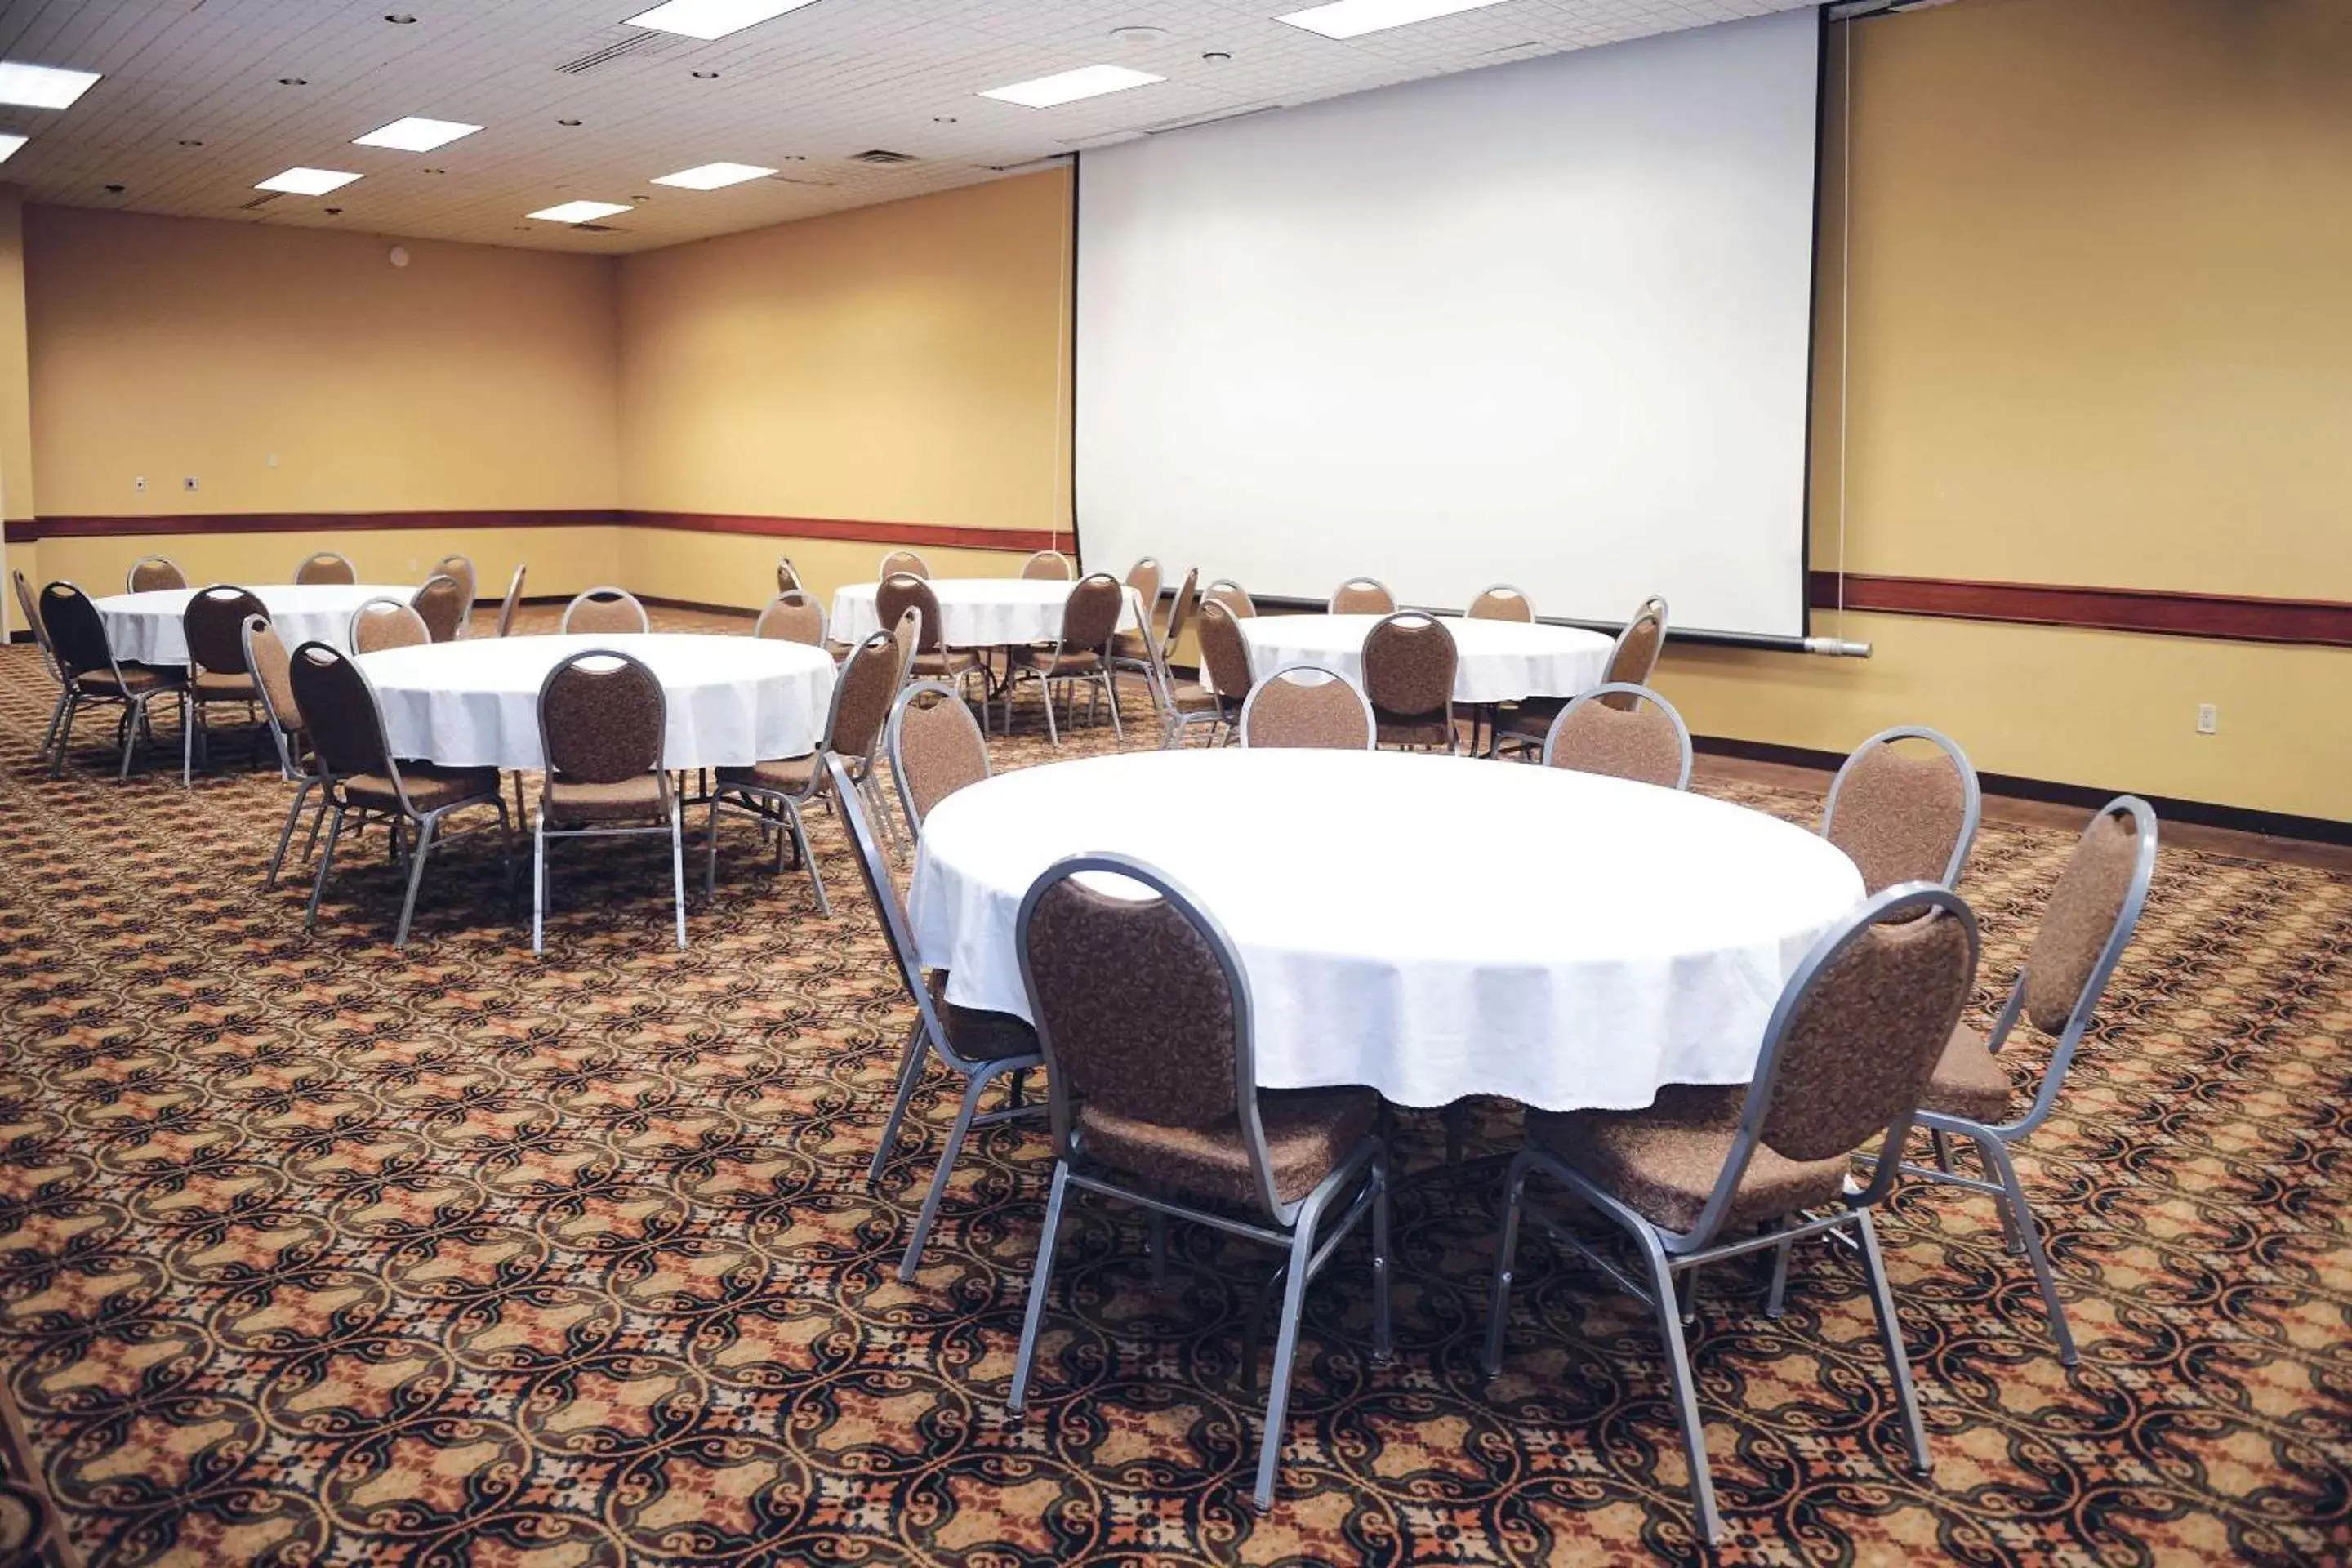 On site in Quality Inn & Suites Ames Conference Center Near ISU Campus